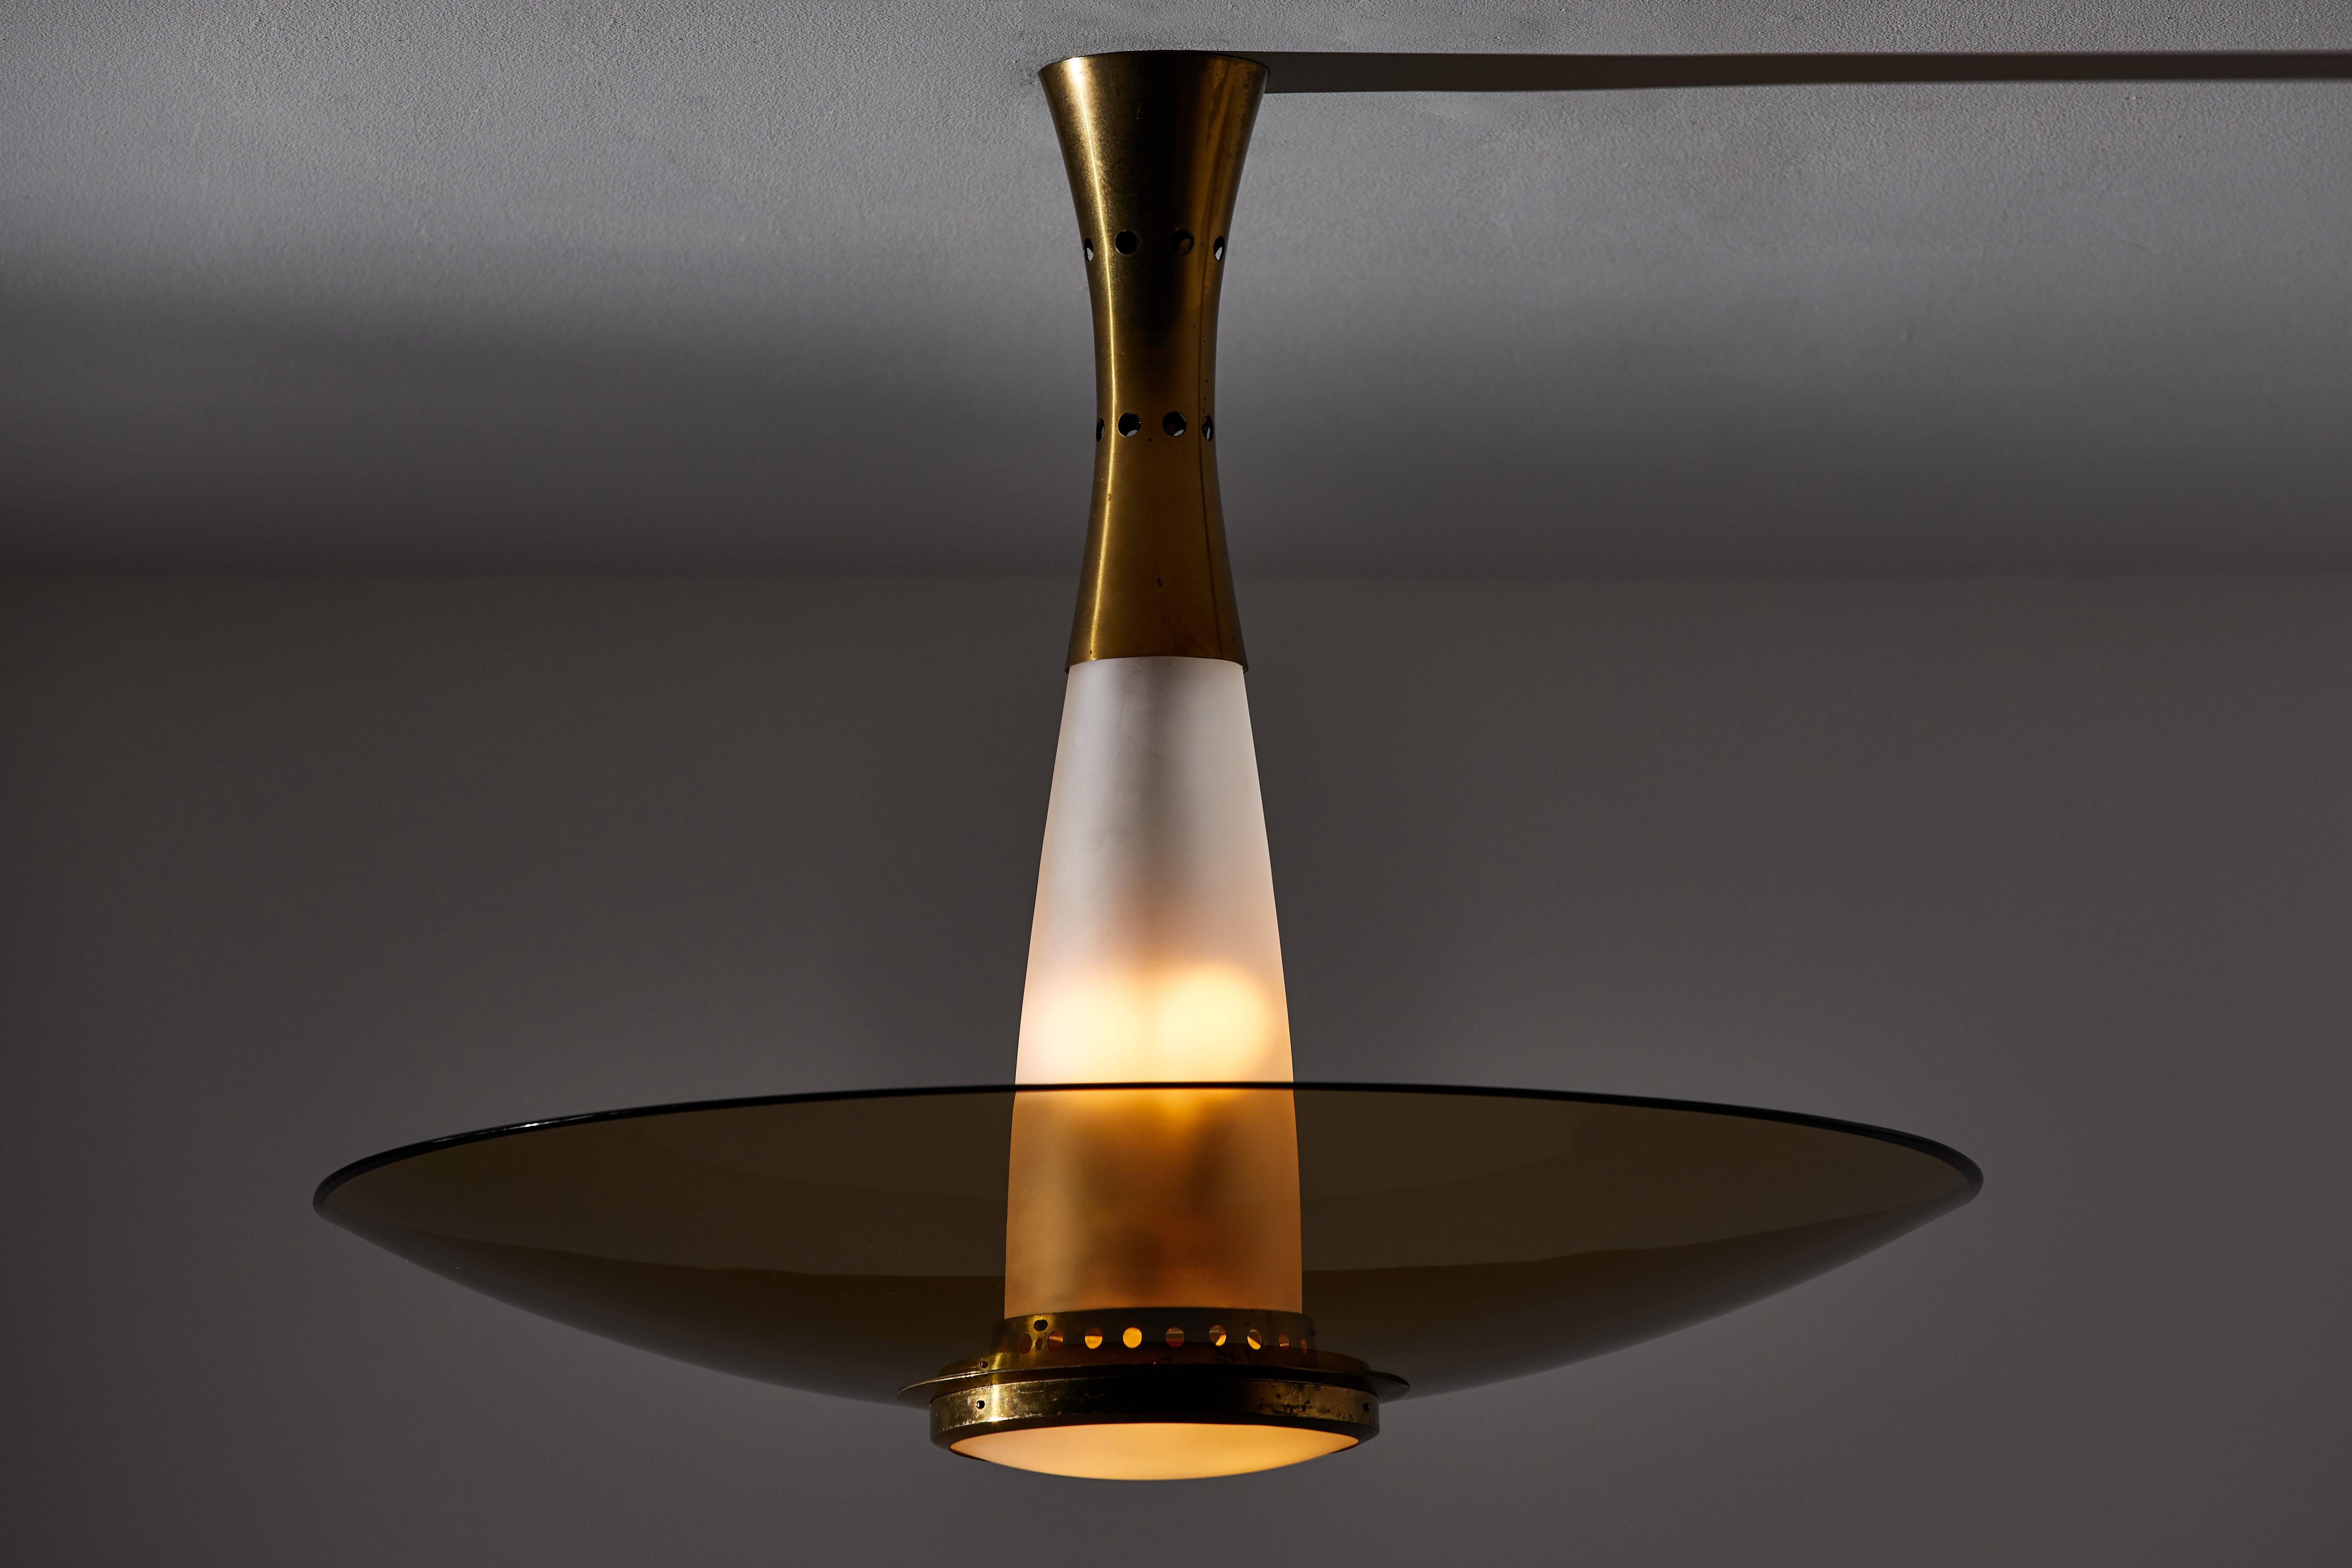 Suspension light by Max Ingrand for Fontana Arte. Designed and manufactured in Italy, 1959. Glass, brass. Rewired for U.S. junction boxes. Original canopy. Takes six E27 50w maximum bulbs. Bulbs provided as a one time courtesy. Literature: Max